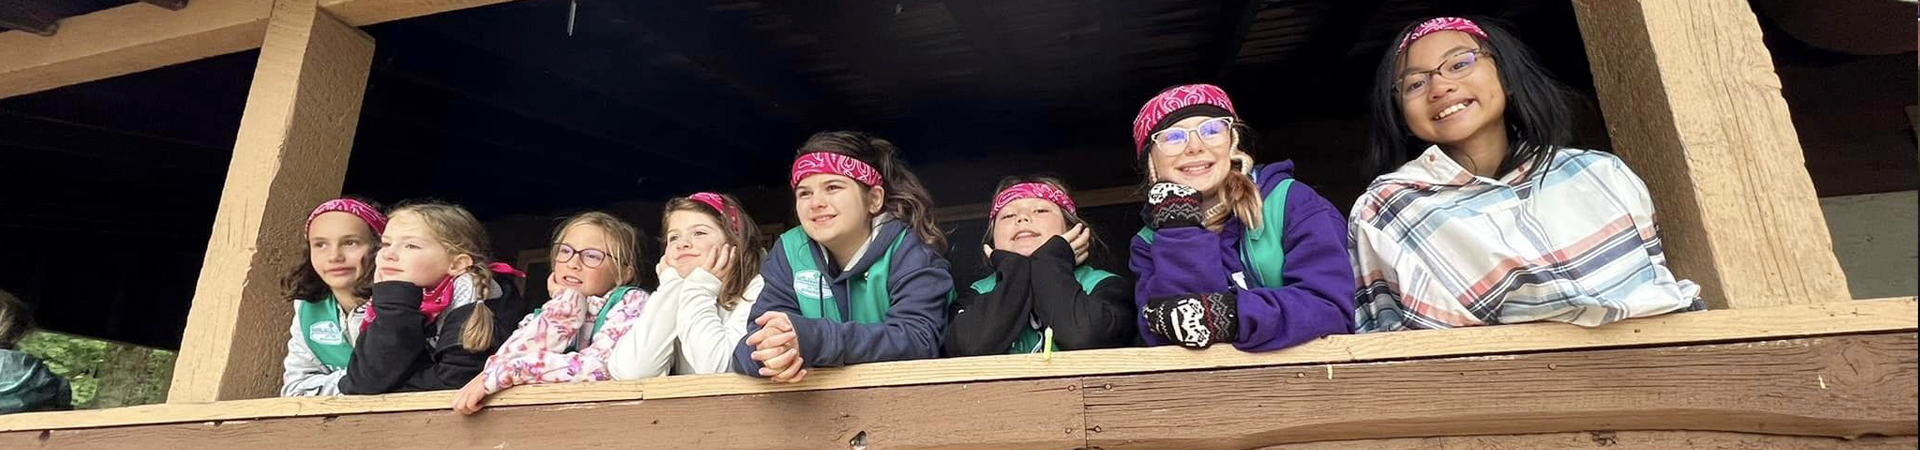  group of girl scouts in vests and bandanas at camp 